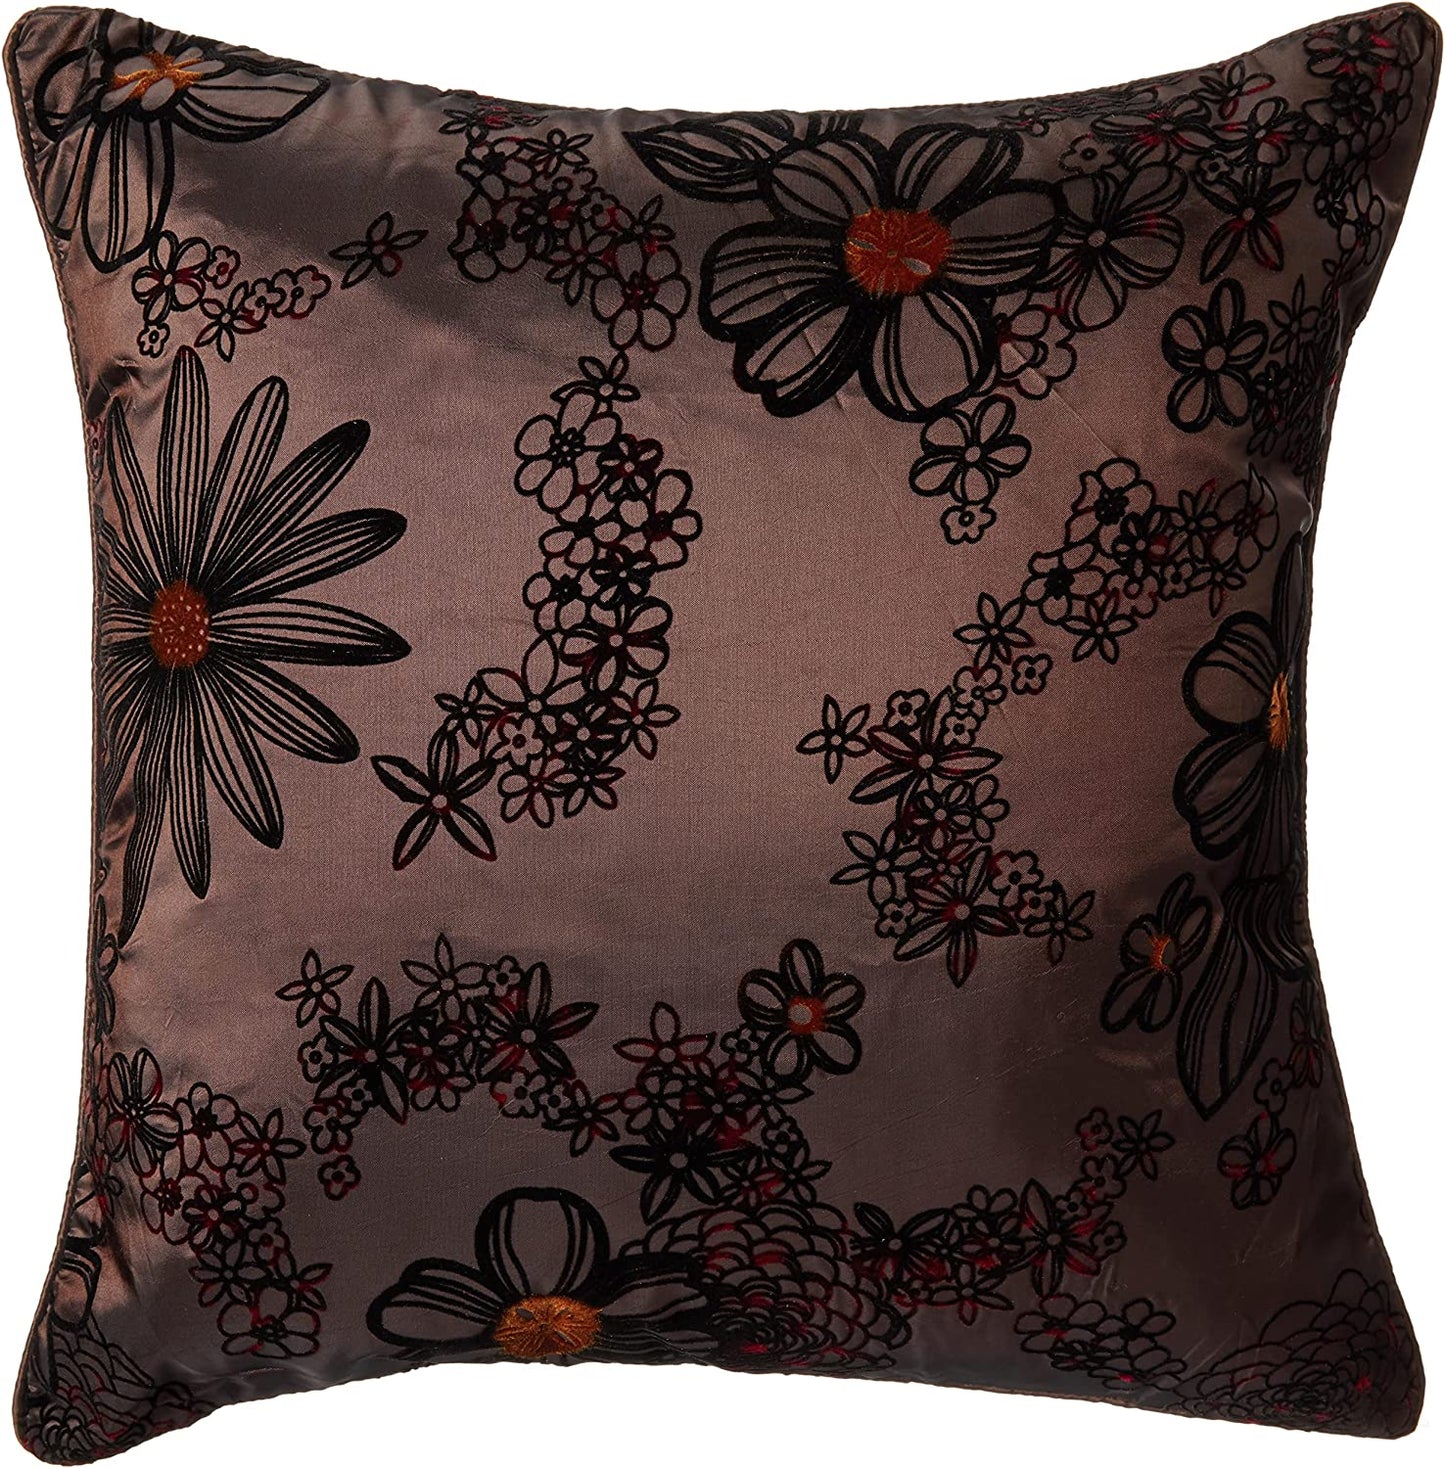 Silky Bloom Daisy Flower Pattern Decorative Accent Throw Pillow Cover